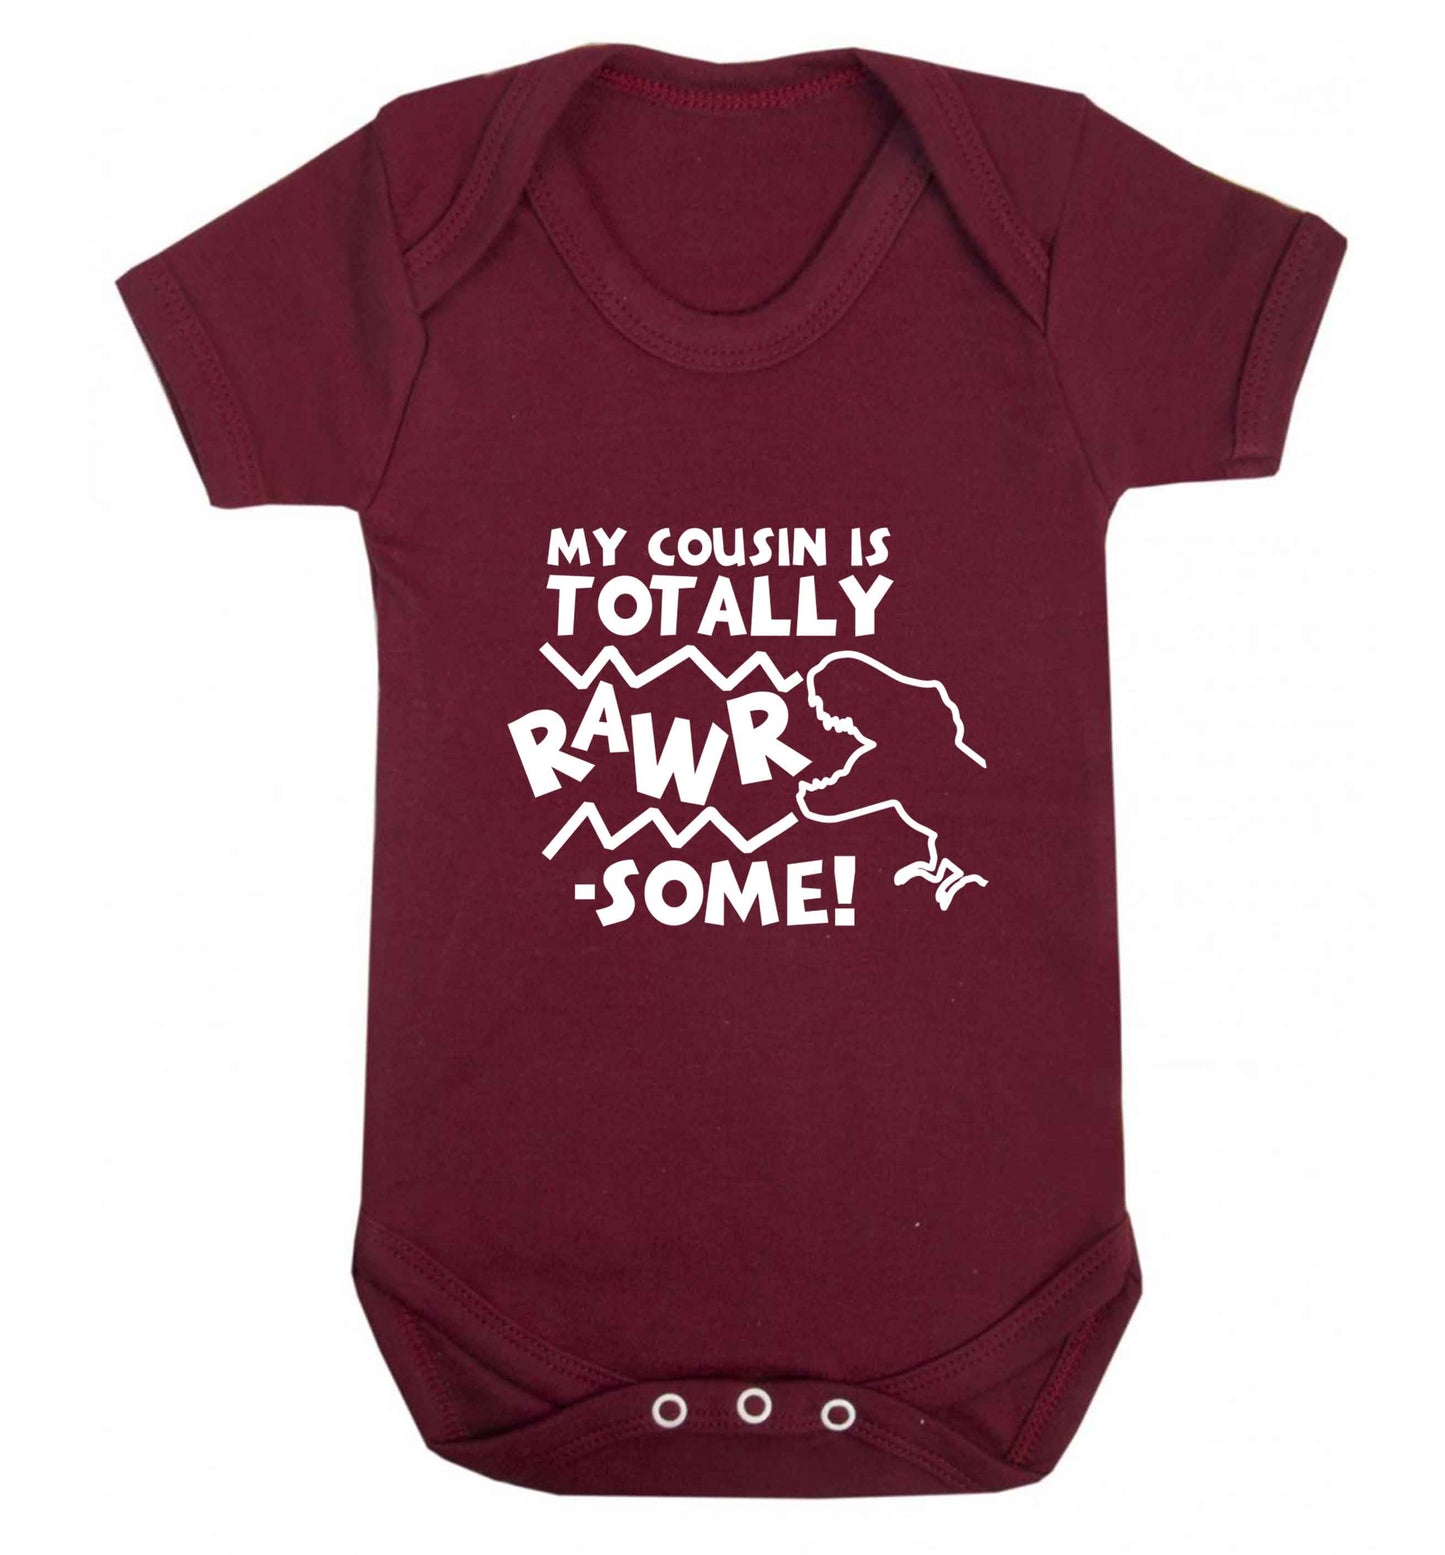 My cousin is totally rawrsome baby vest maroon 18-24 months